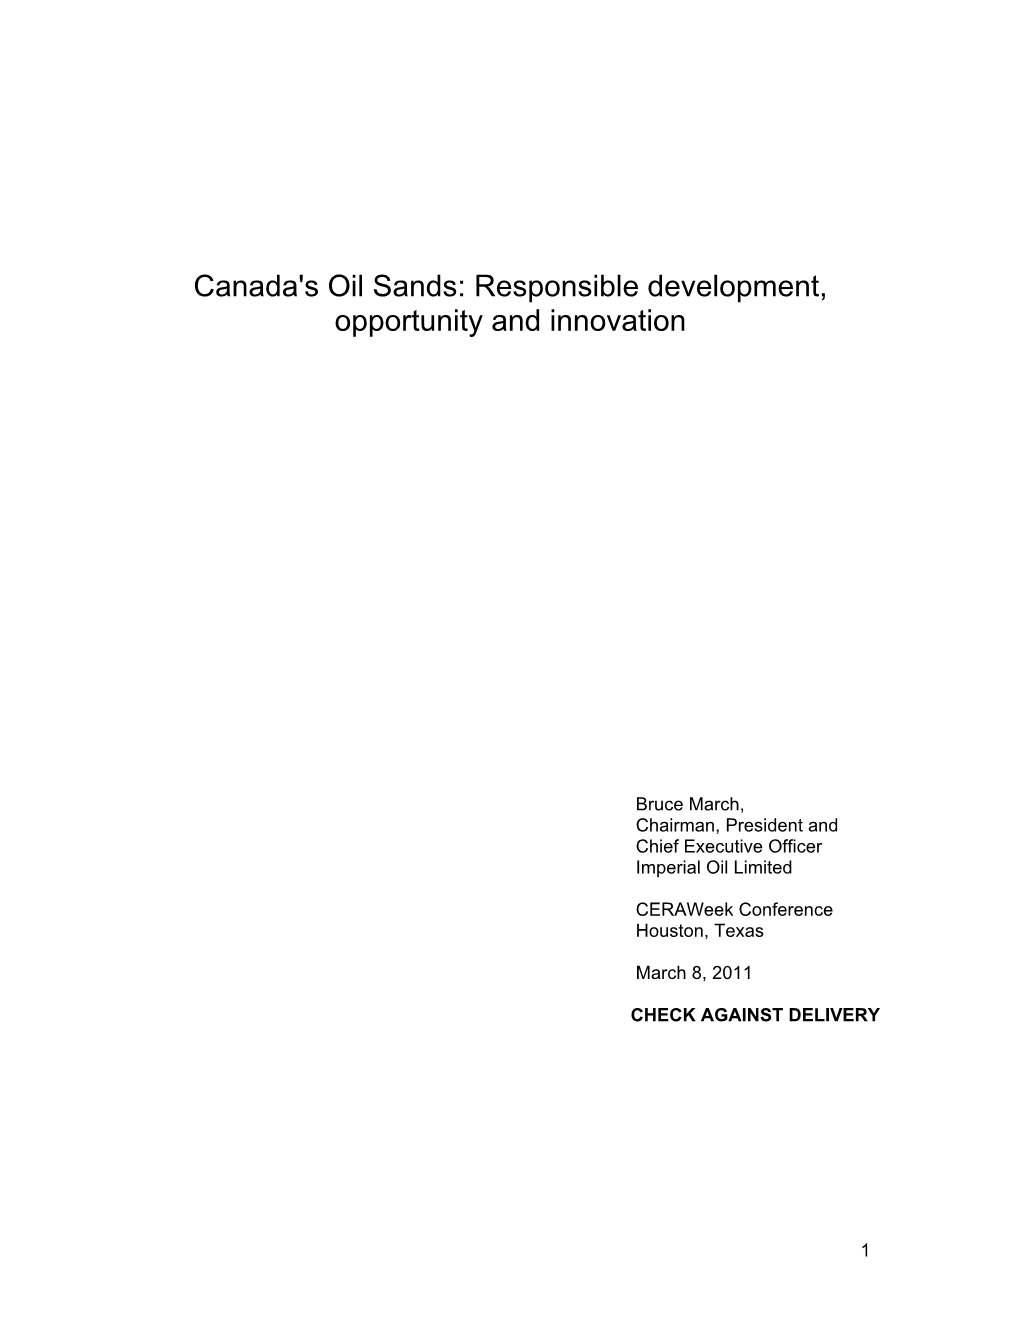 Canada's Oil Sands: Responsible Development, Opportunity and Innovation